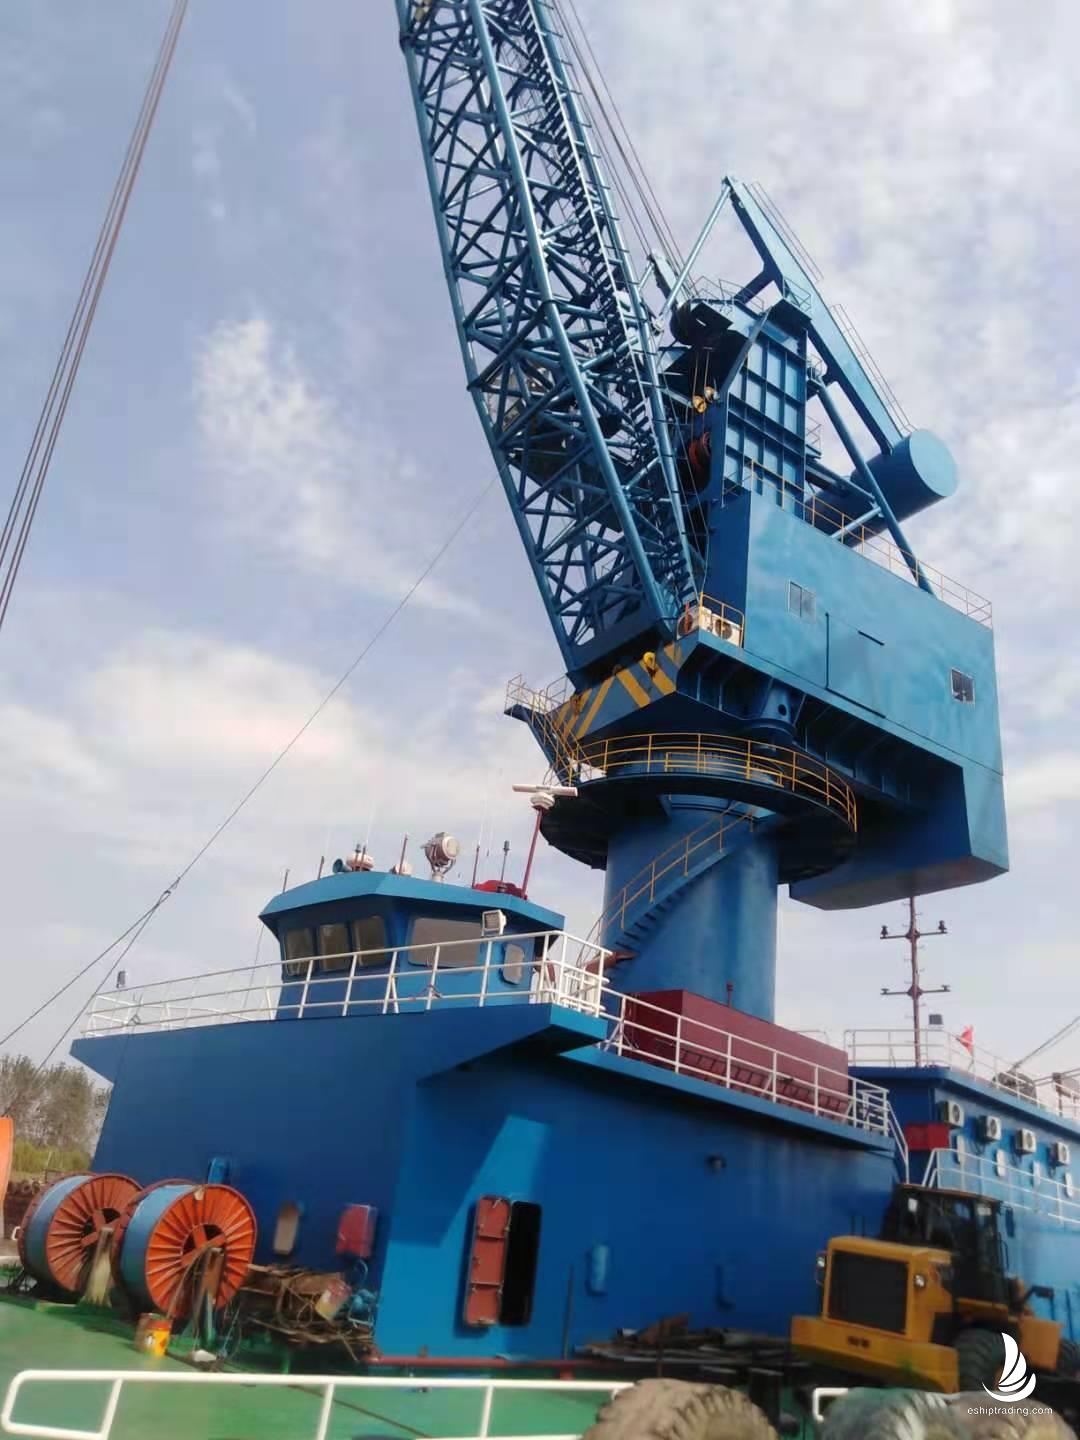 60 T Crane Barge For Sale